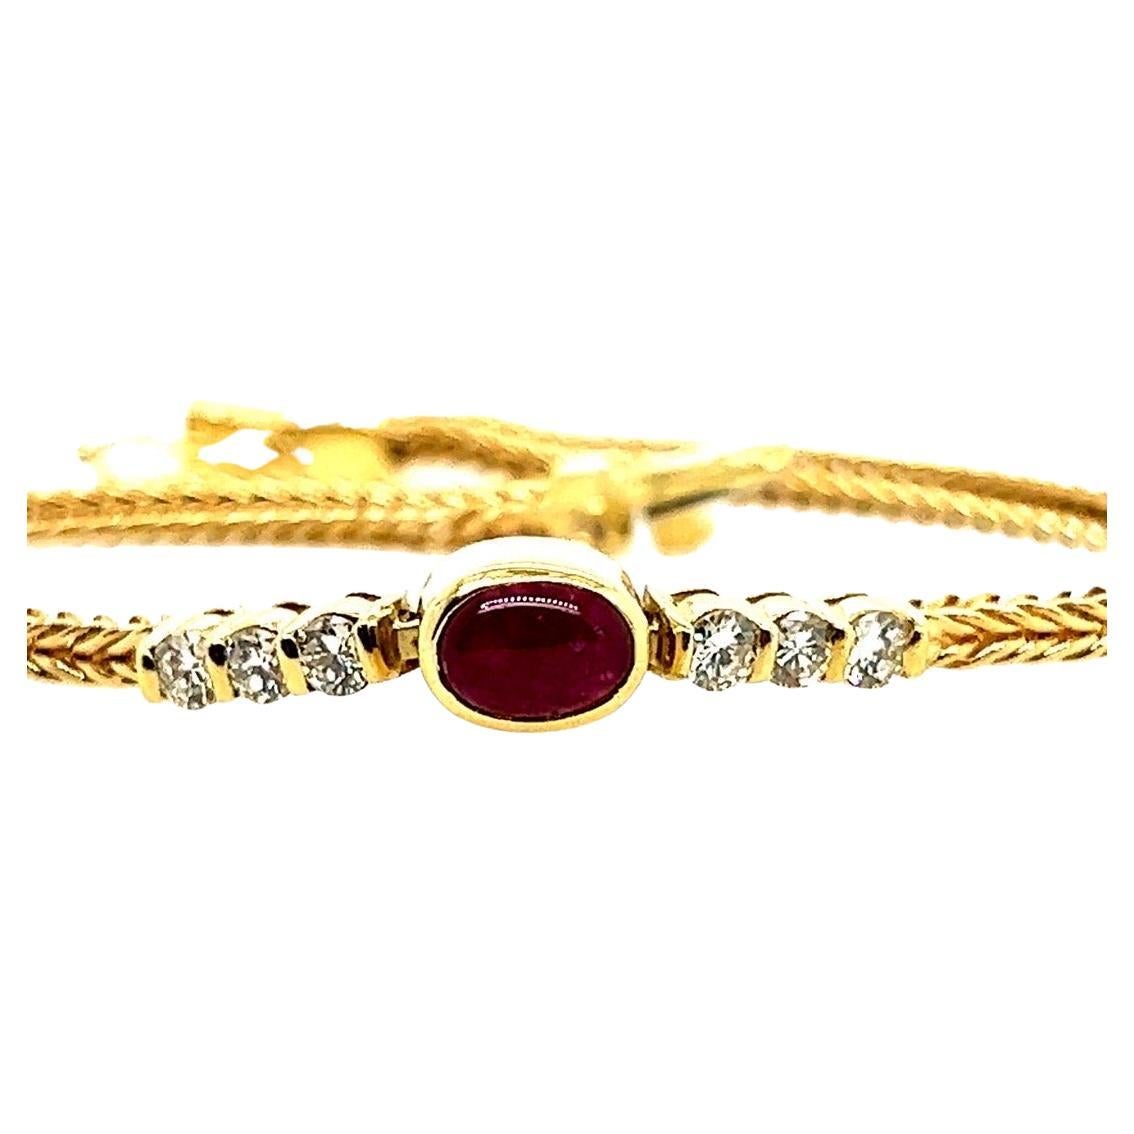 Retro Gold 1 Carat Natural Diamond and Red Ruby Cabochon Bracelet, circa 1970 For Sale